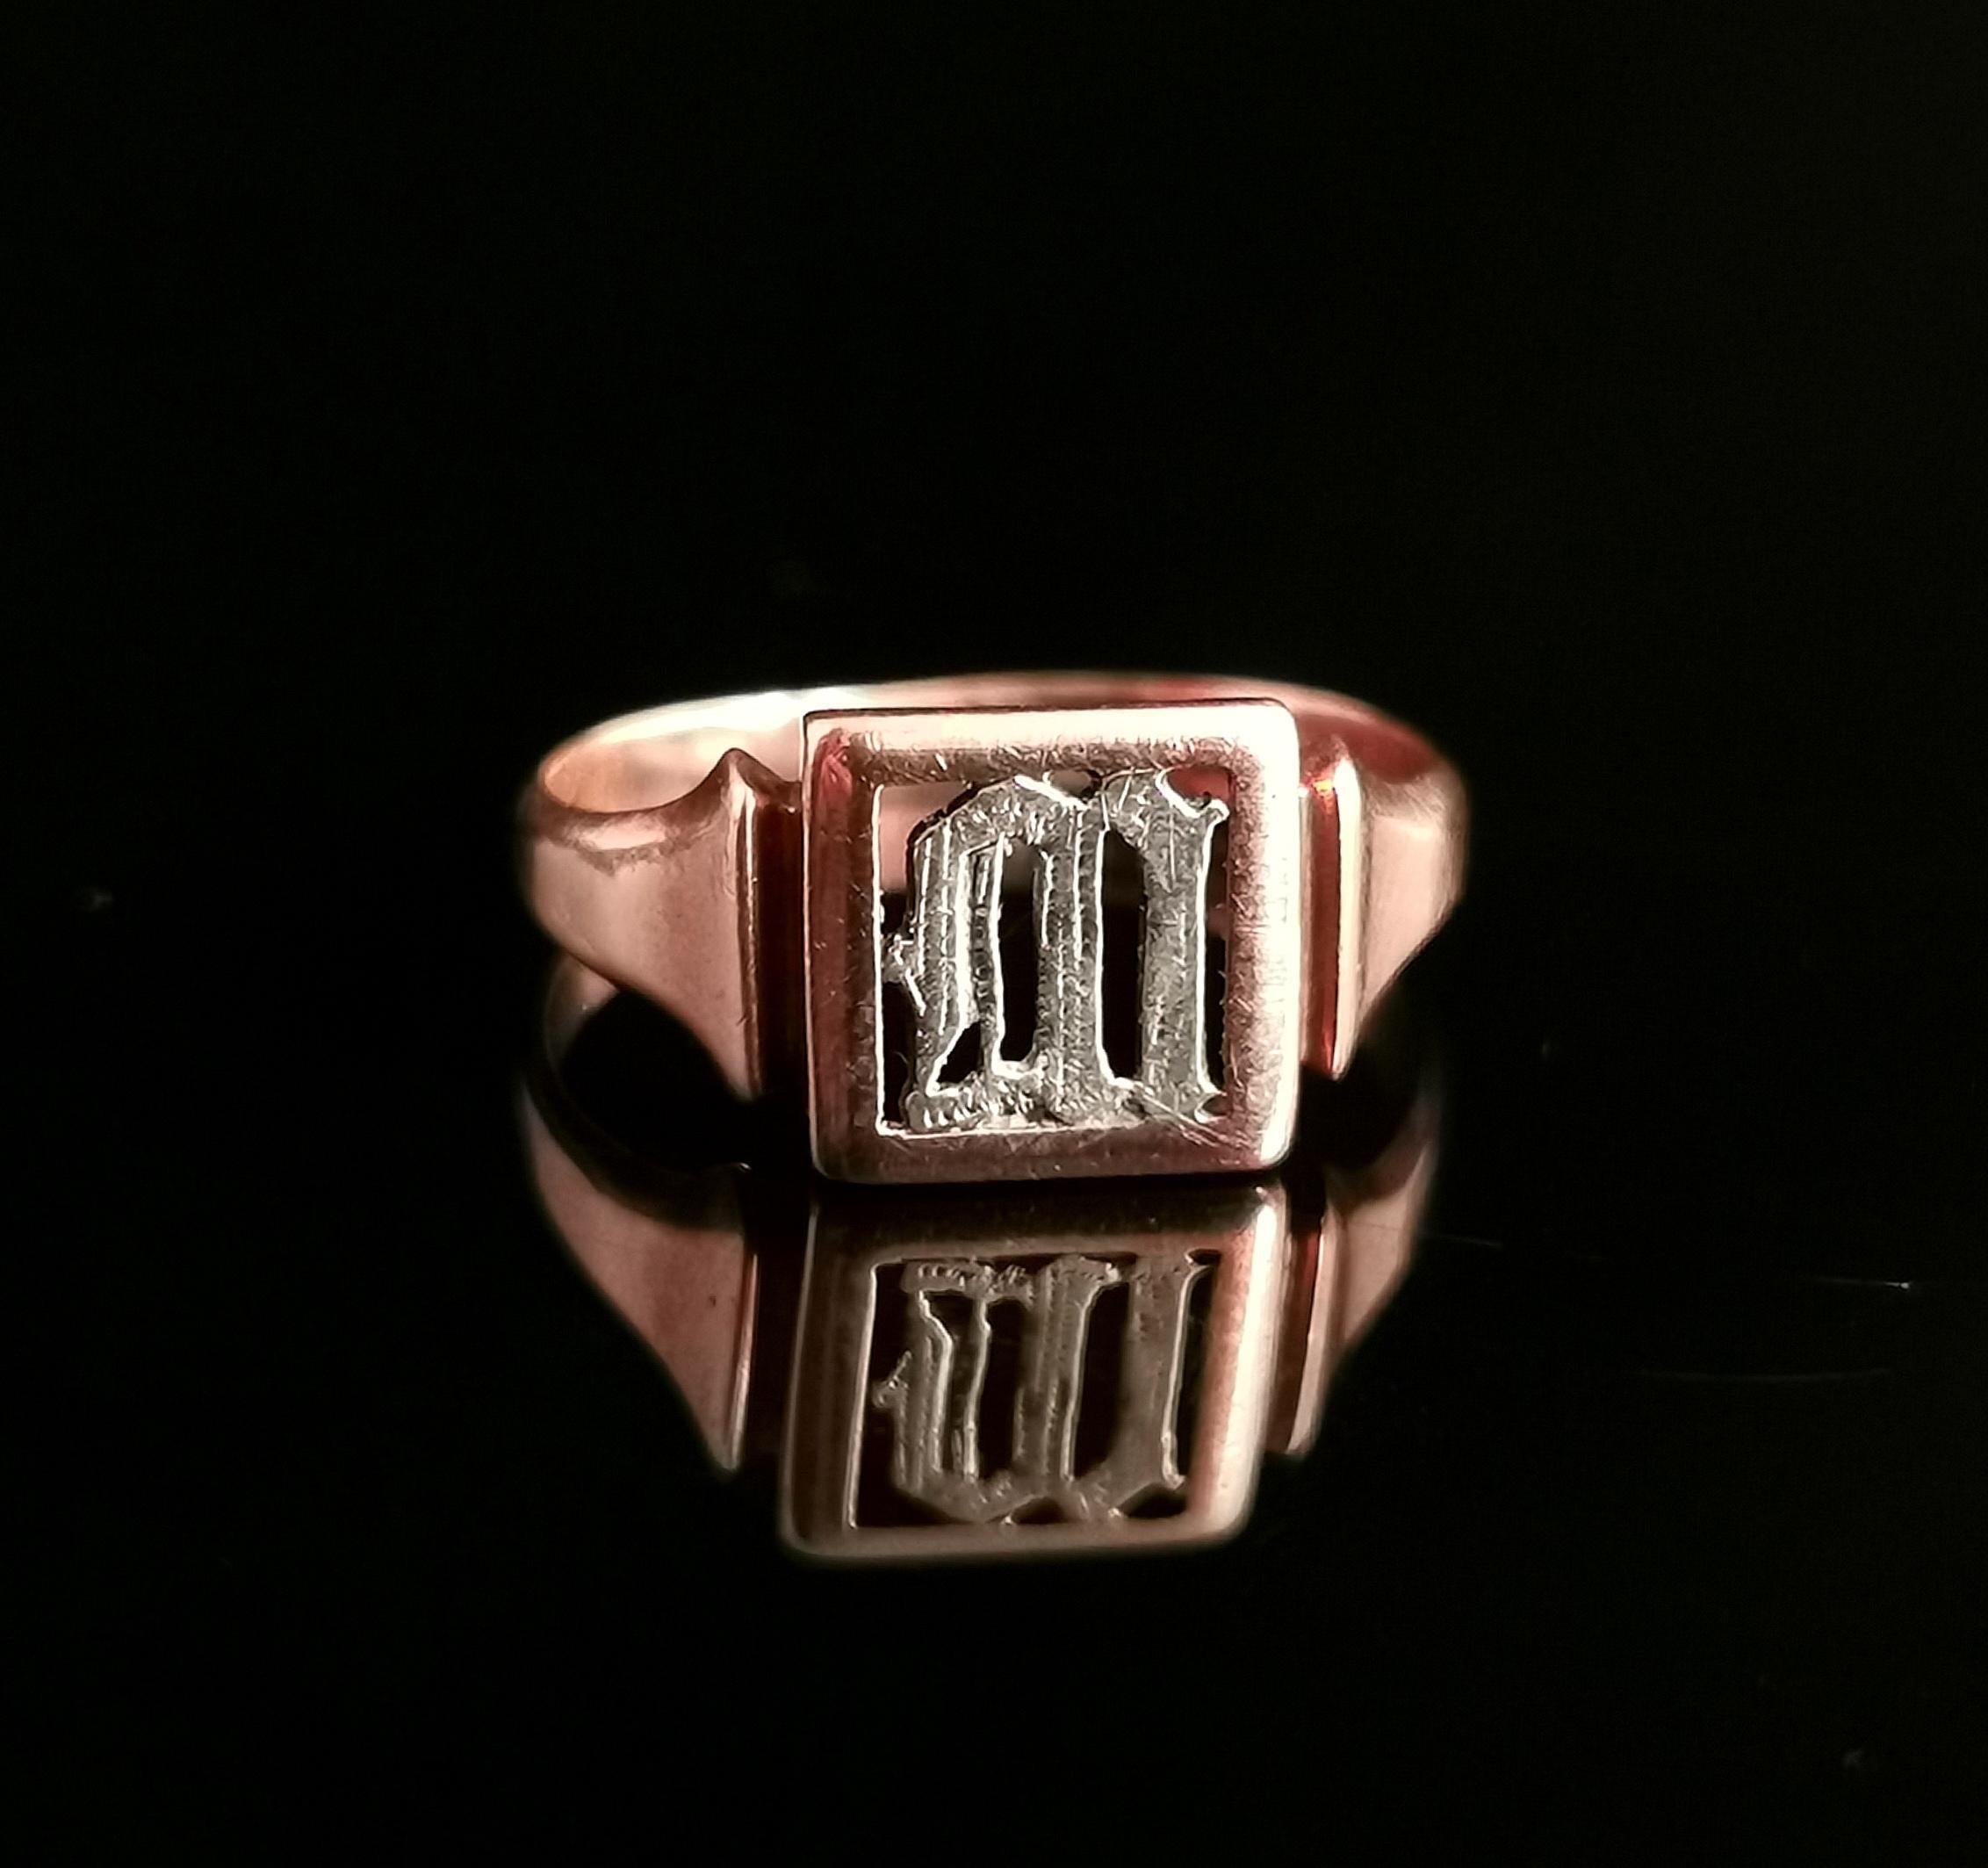 An attractive and interesting antique signet ring.

Early 20th century, it is crafted from 9 karat Rose gold and has an intricate cut out design with the letter M in gothic script.

The M is crafted from sterling silver and this gives a beautiful